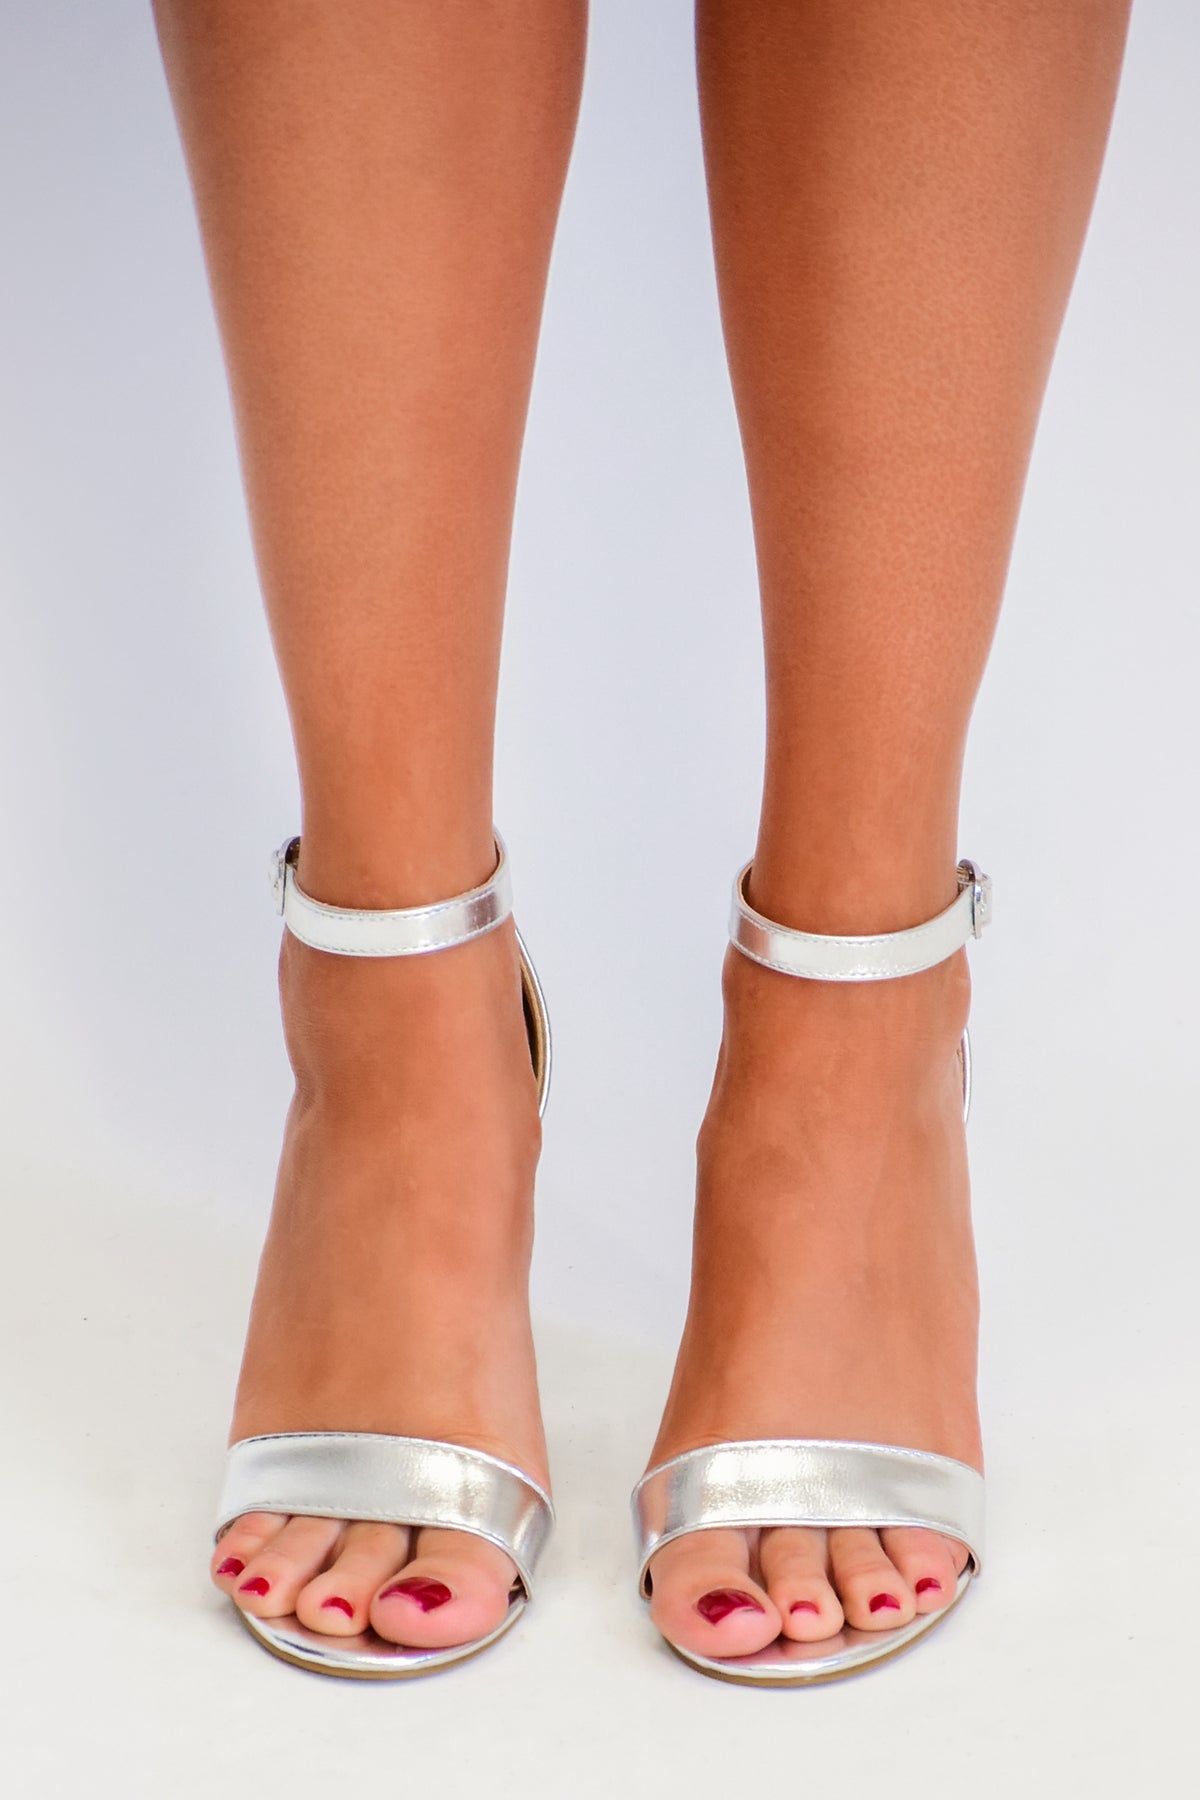 Holiday Party Heels: Silver